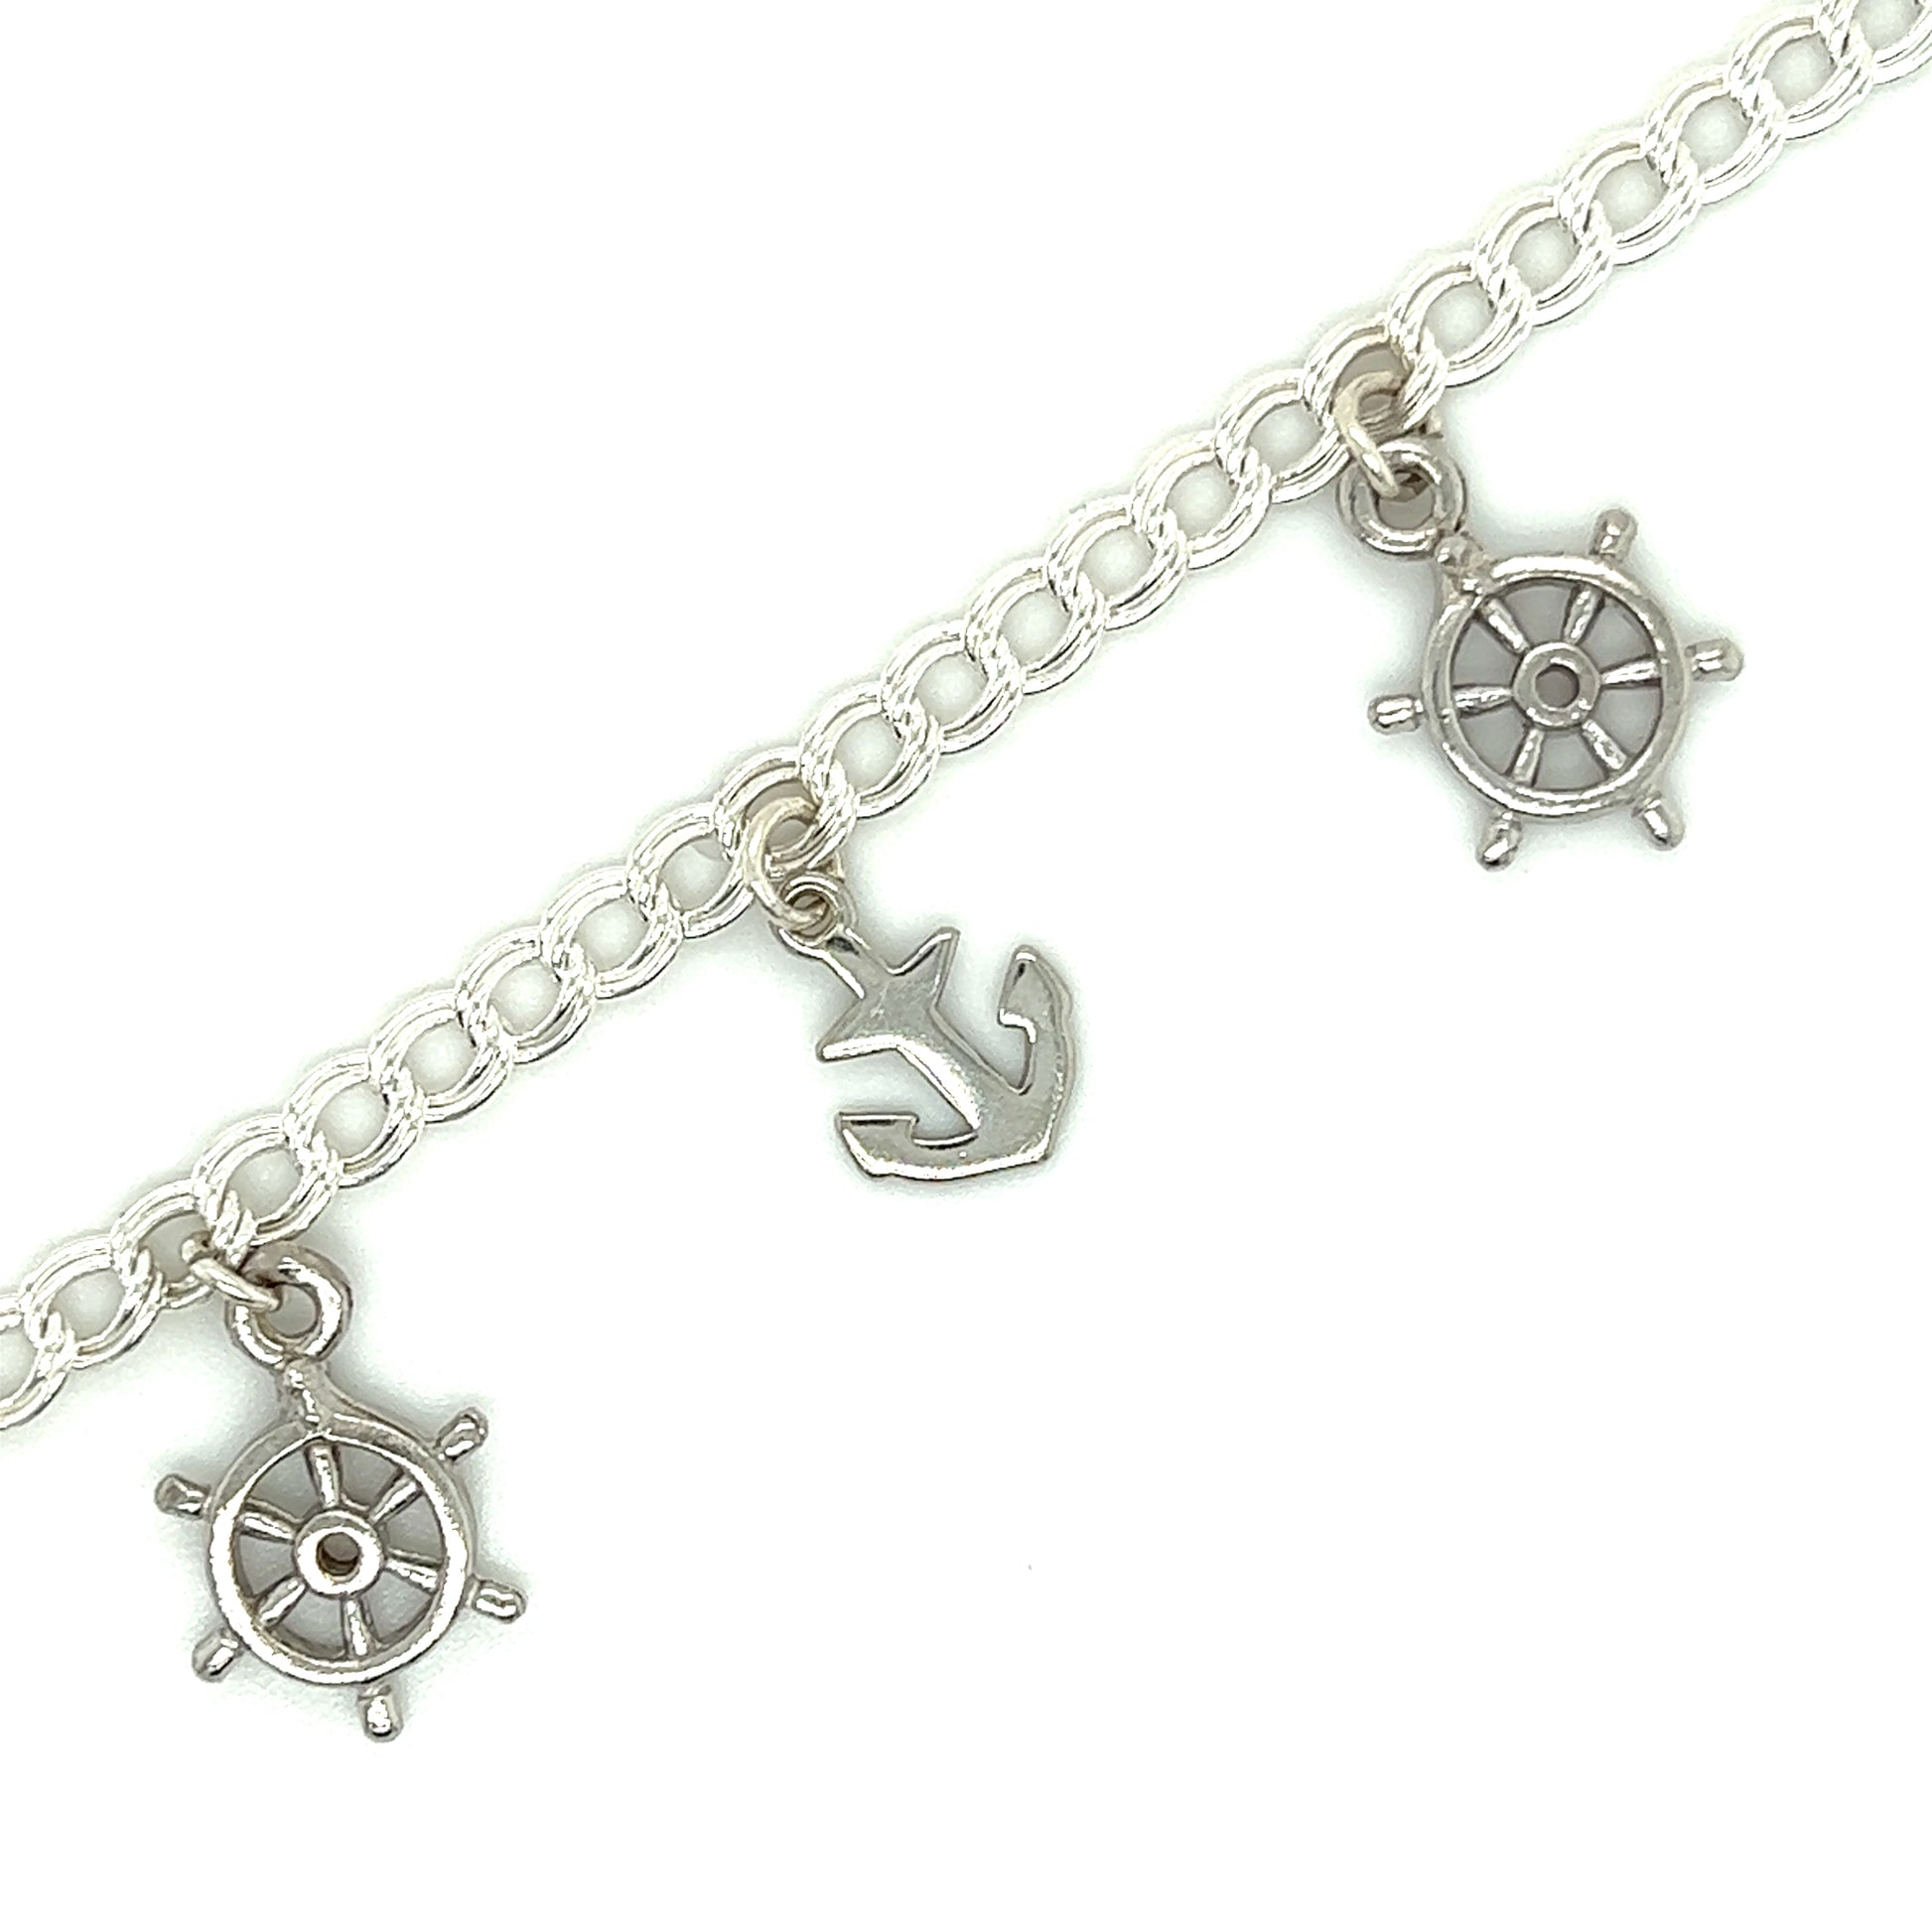 Nautical Bracelet with Six Charms in Sterling Silver Charms View